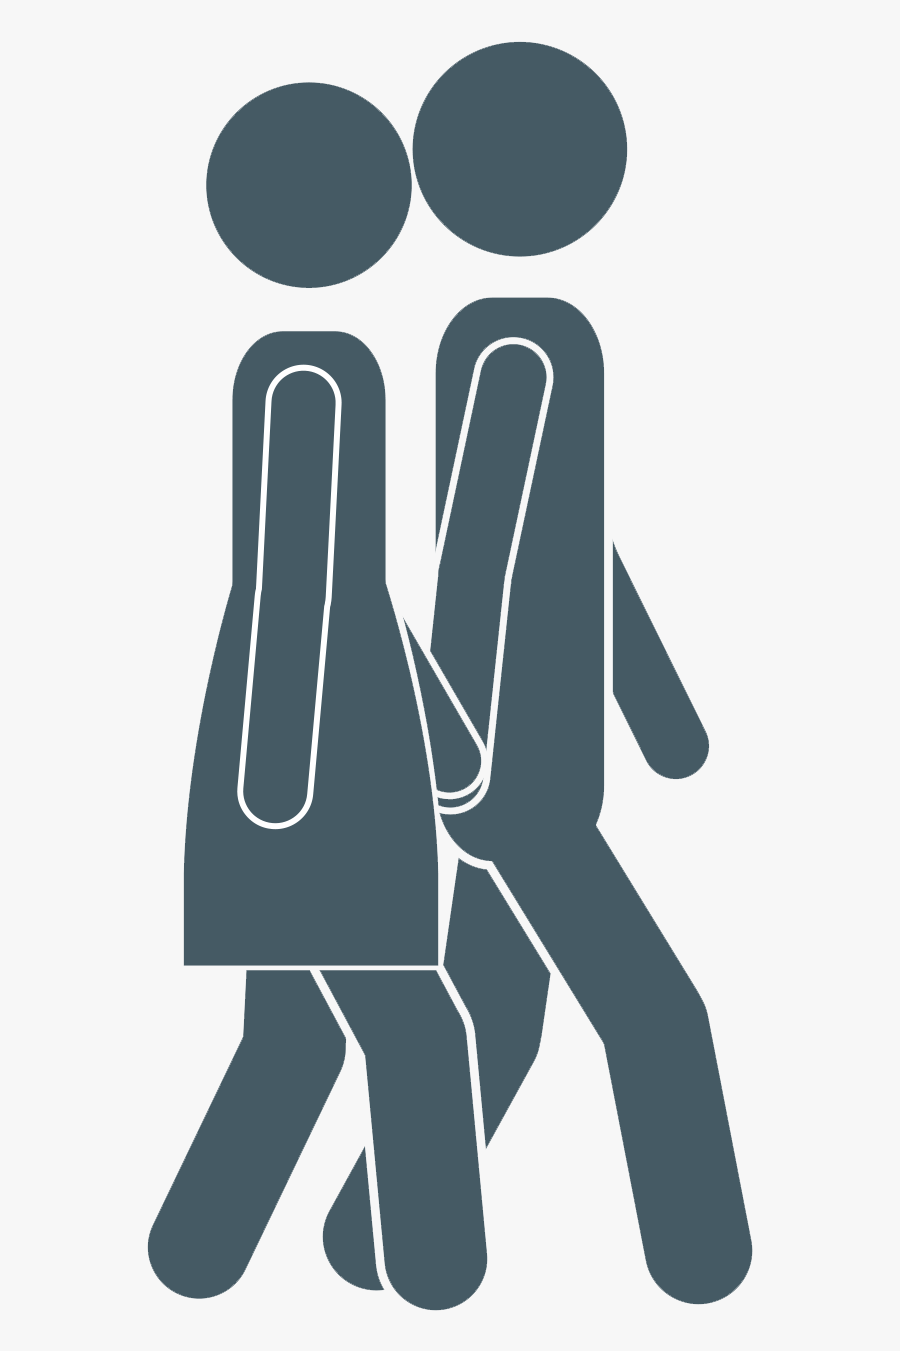 Walking Man And Woman Graphic - People Walking Symbol, Transparent Clipart